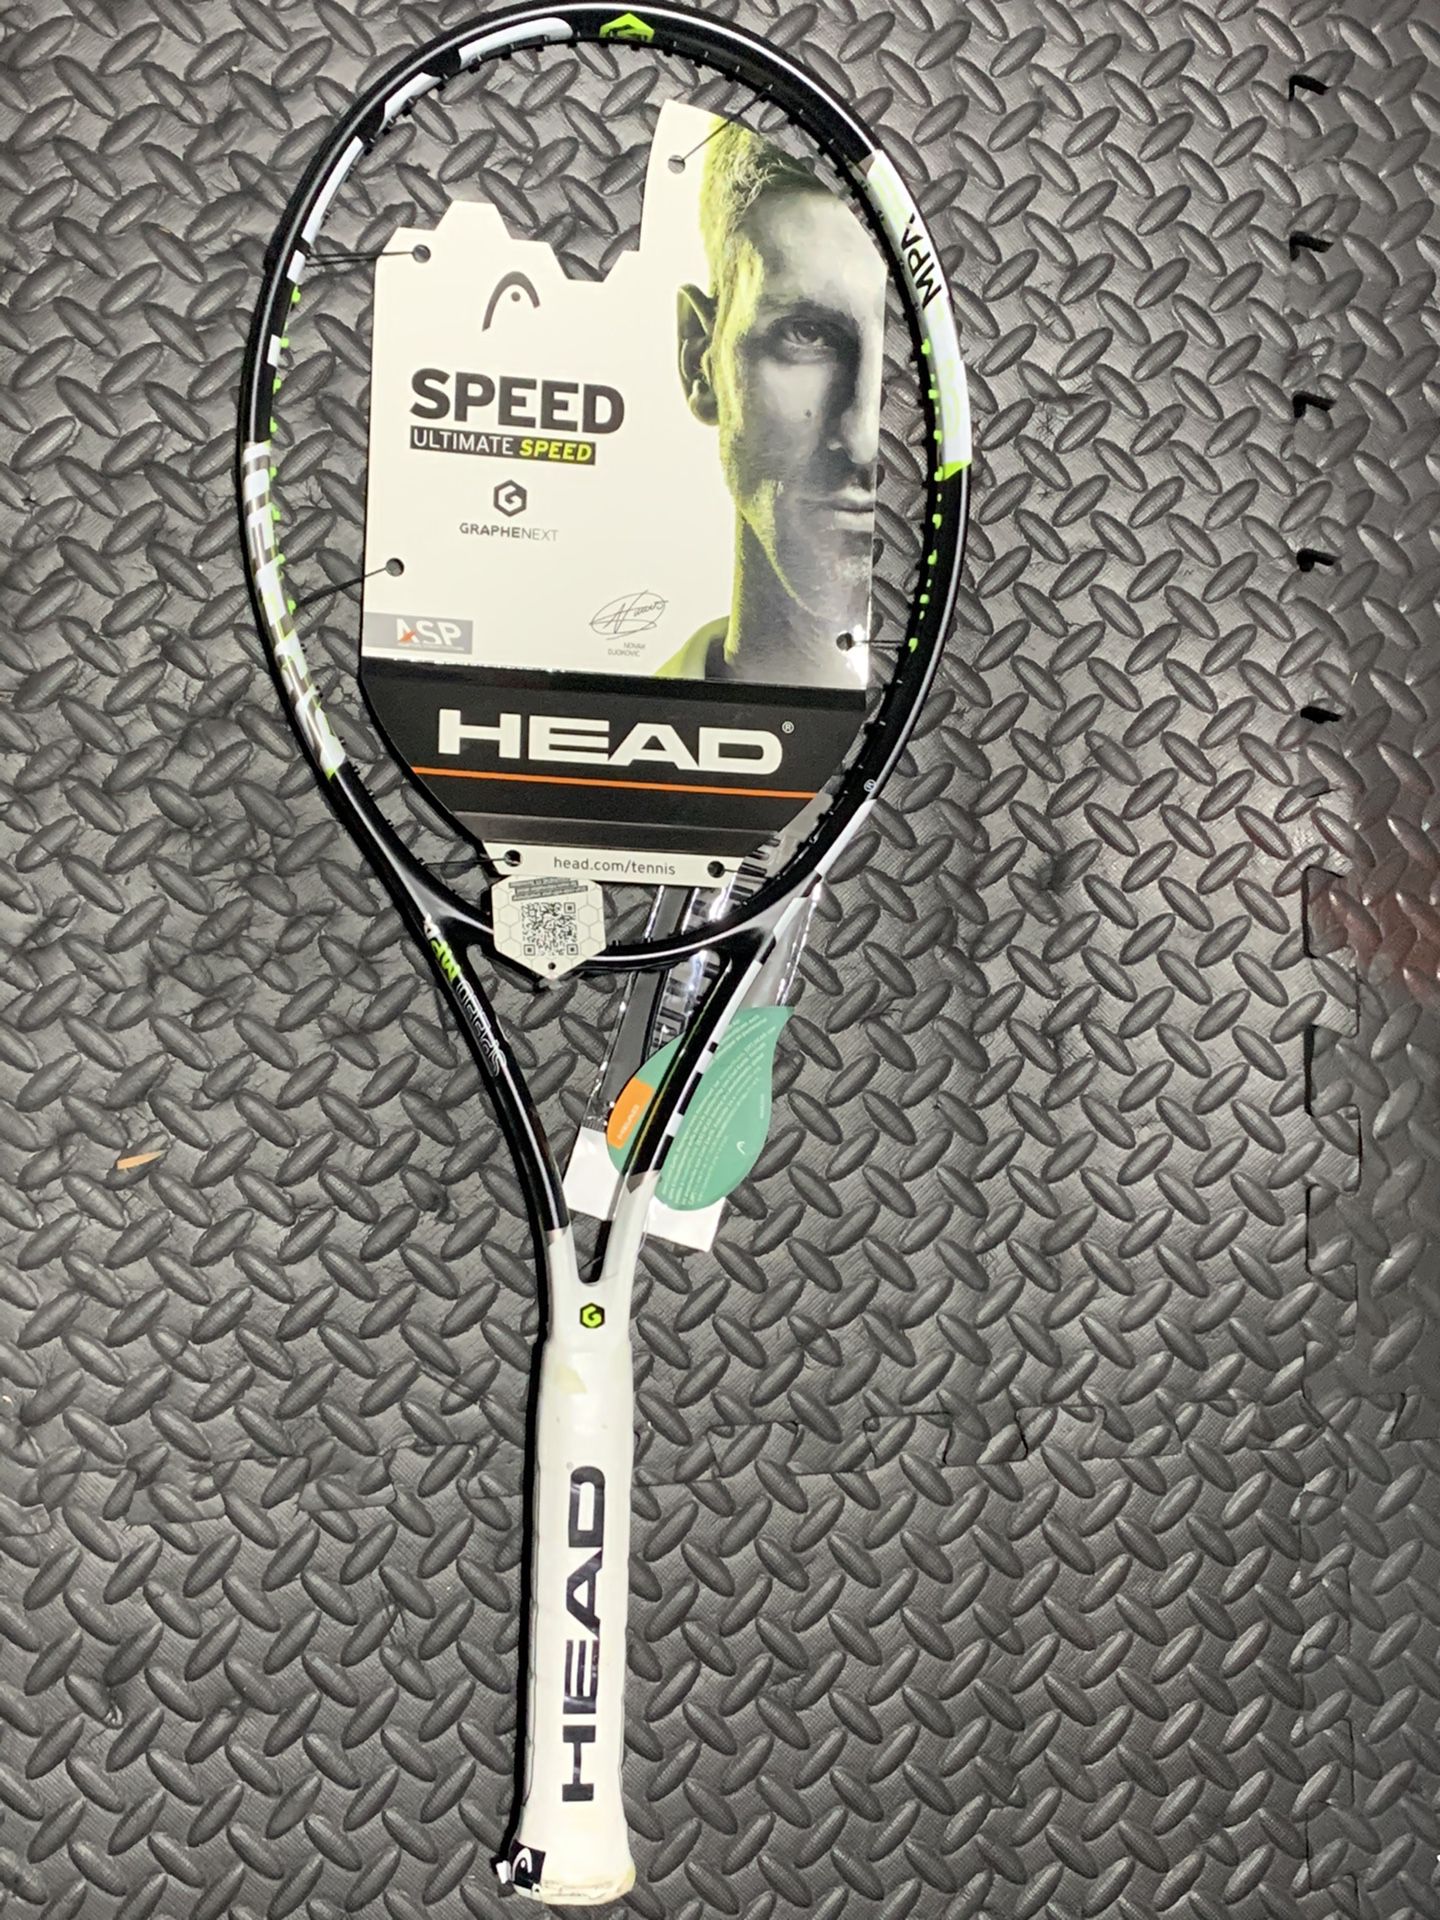 Brand new tennis rackets at 50% of the price